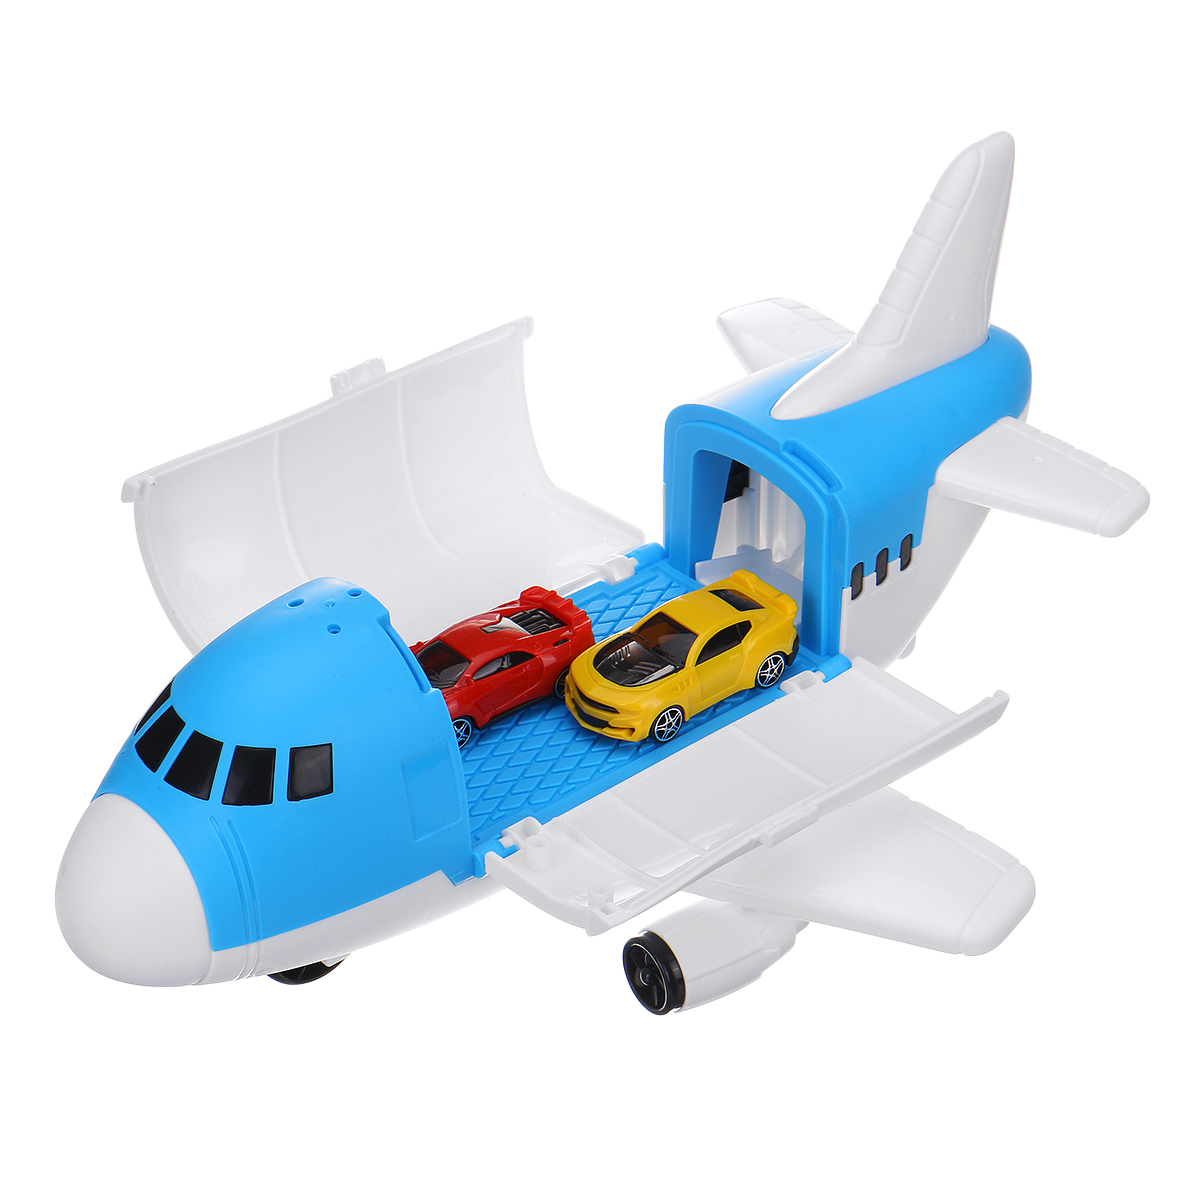 Storage-Transport-Aircraft-Model-Inertia-Diecast-Model-Car-Set-Toy-for-Childrens-Gift-1621631-1